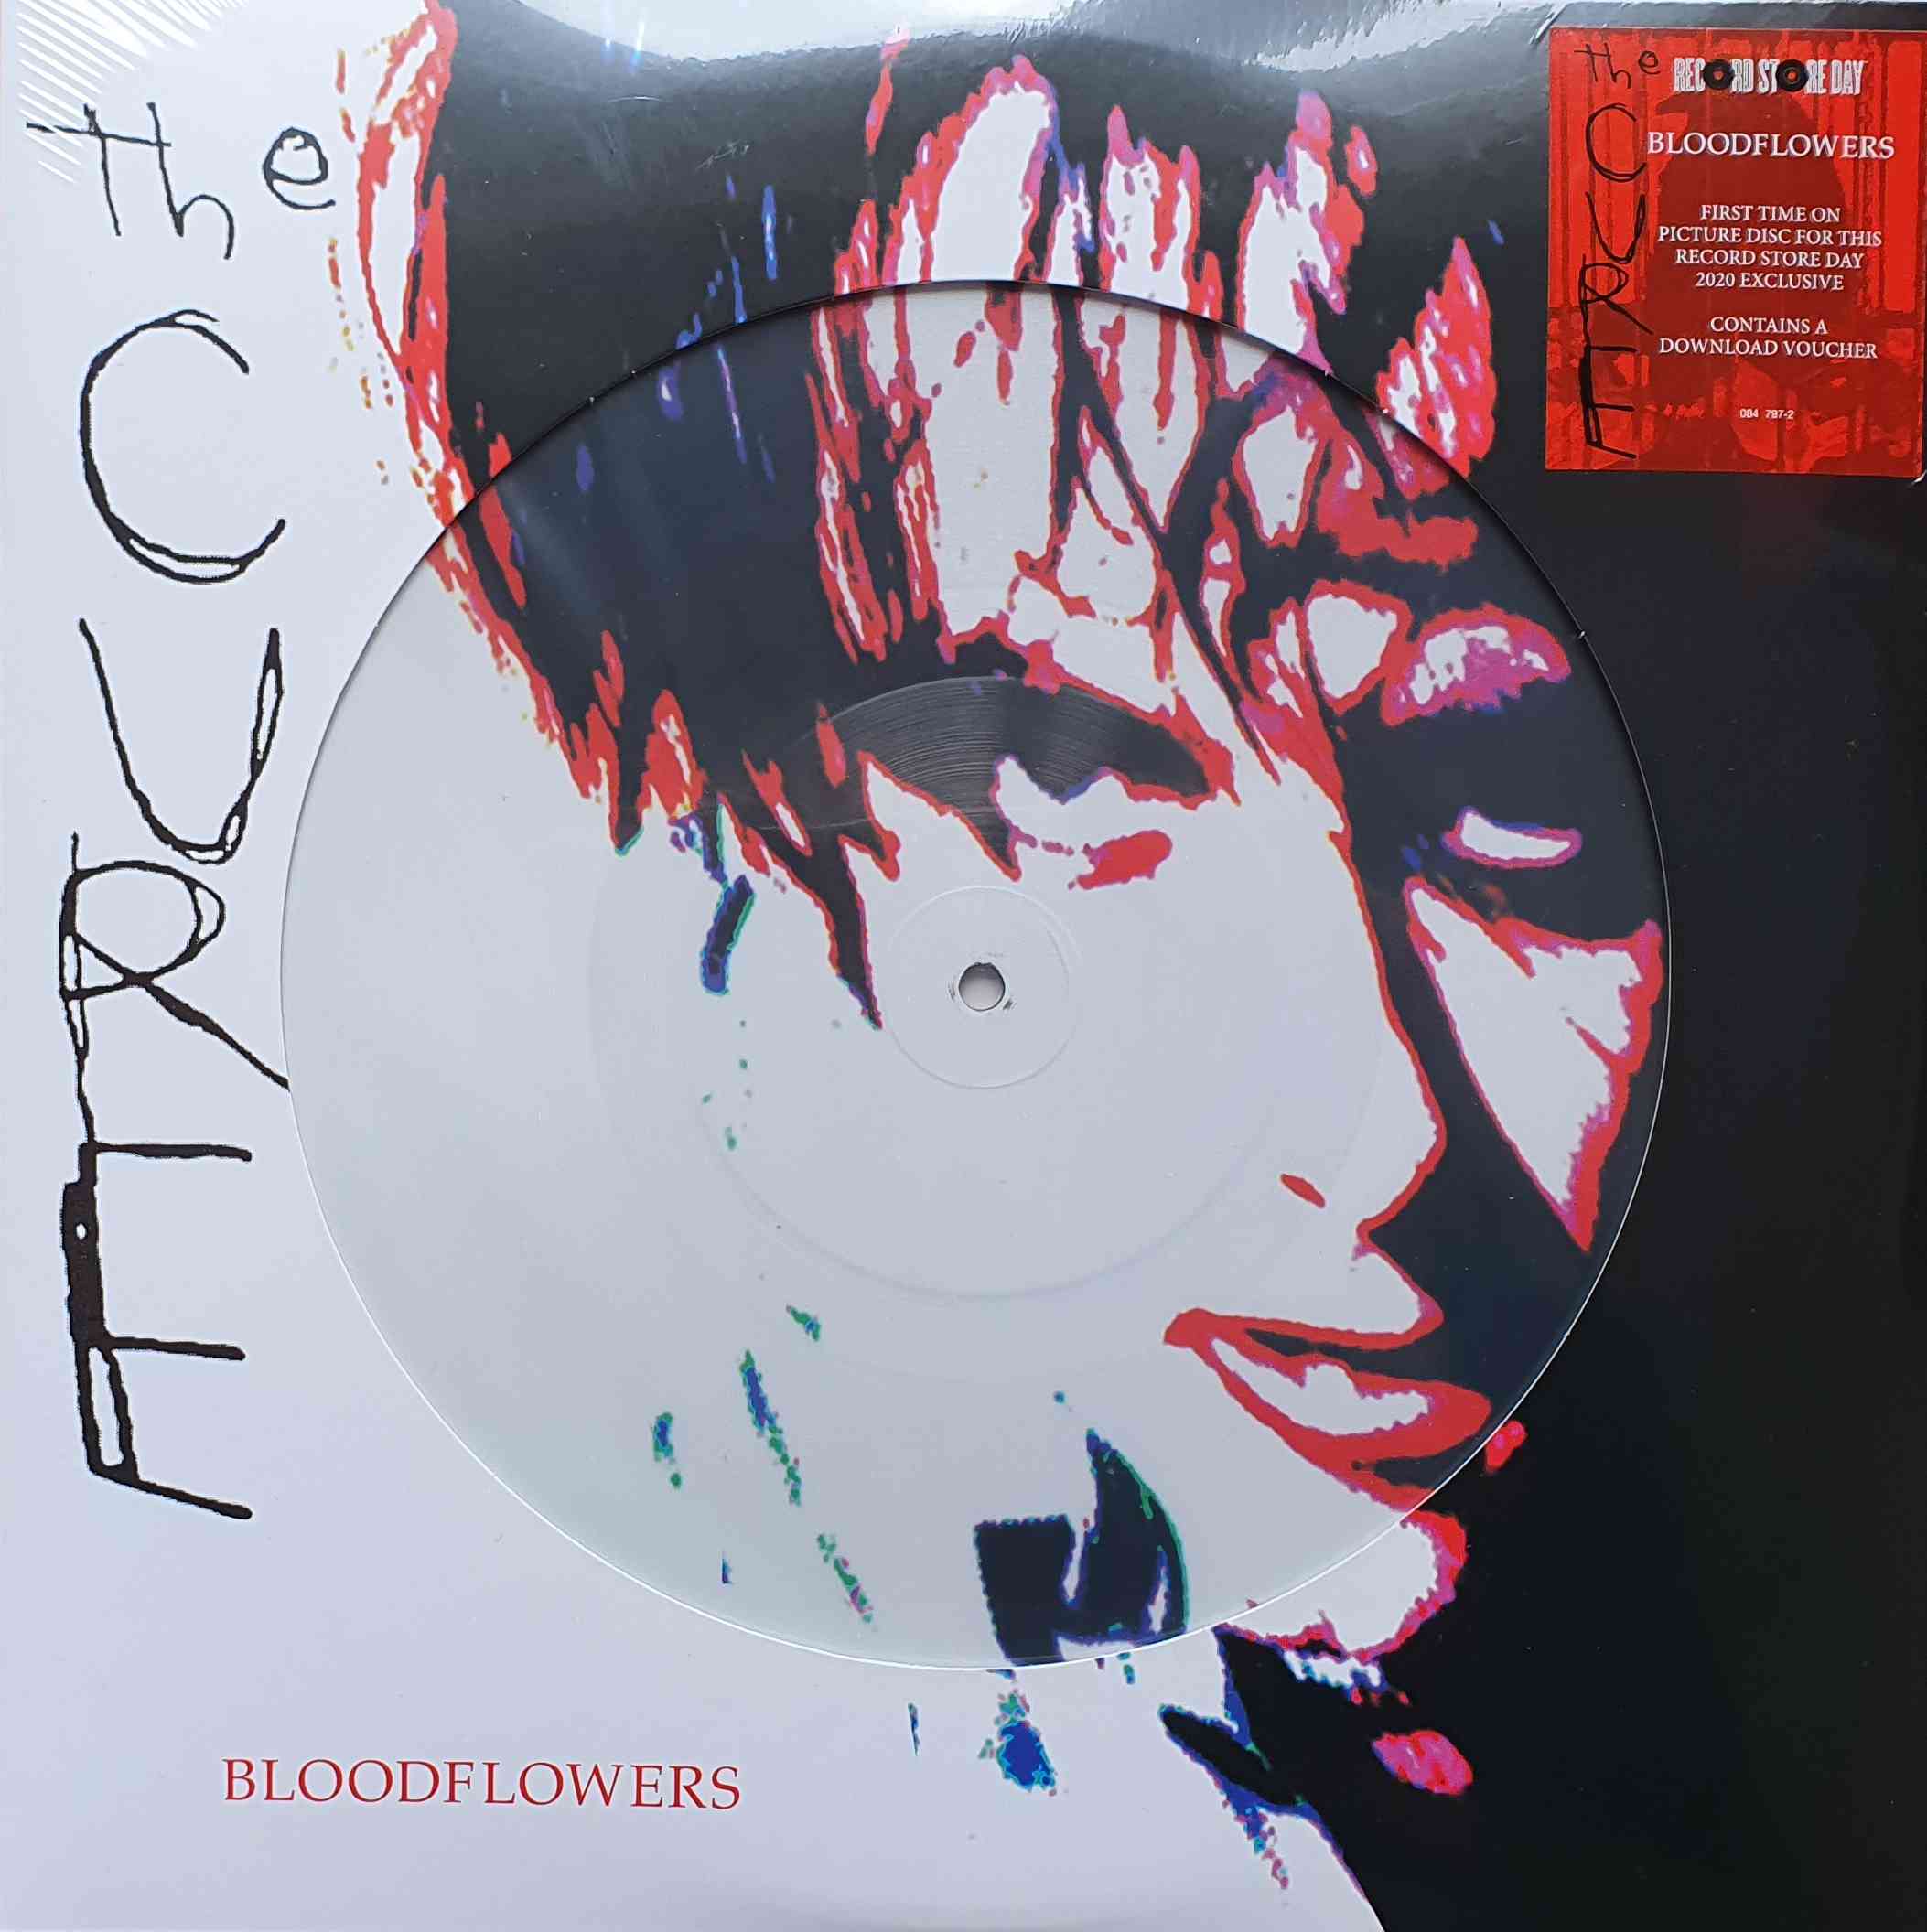 Picture of 084 797-2 Bloodflowers Limited edition picture disc - Record Store Day 2020 by artist The Cure